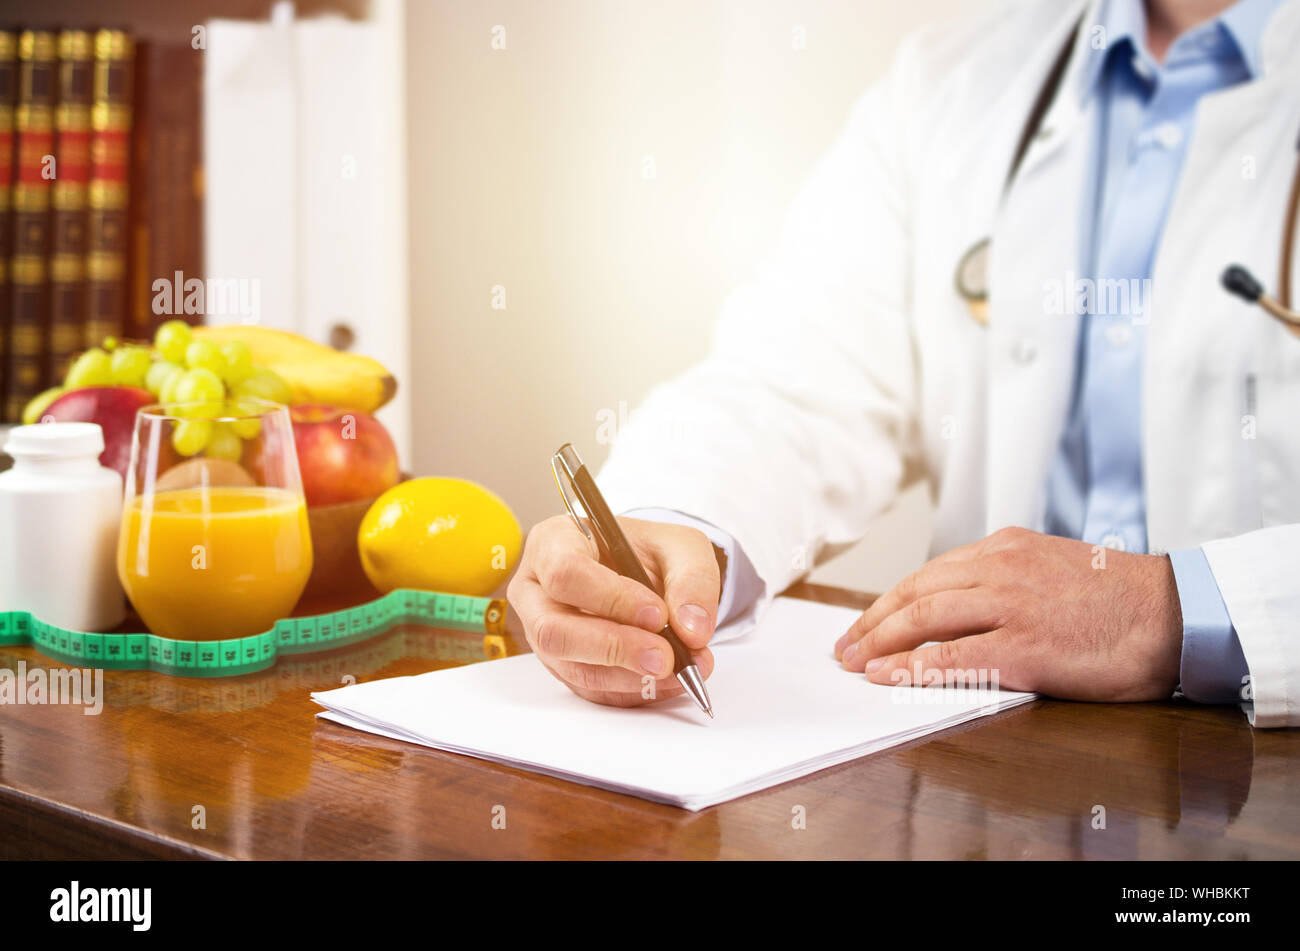 Nutritionist writing diet plan, dietician consultation Stock Photo